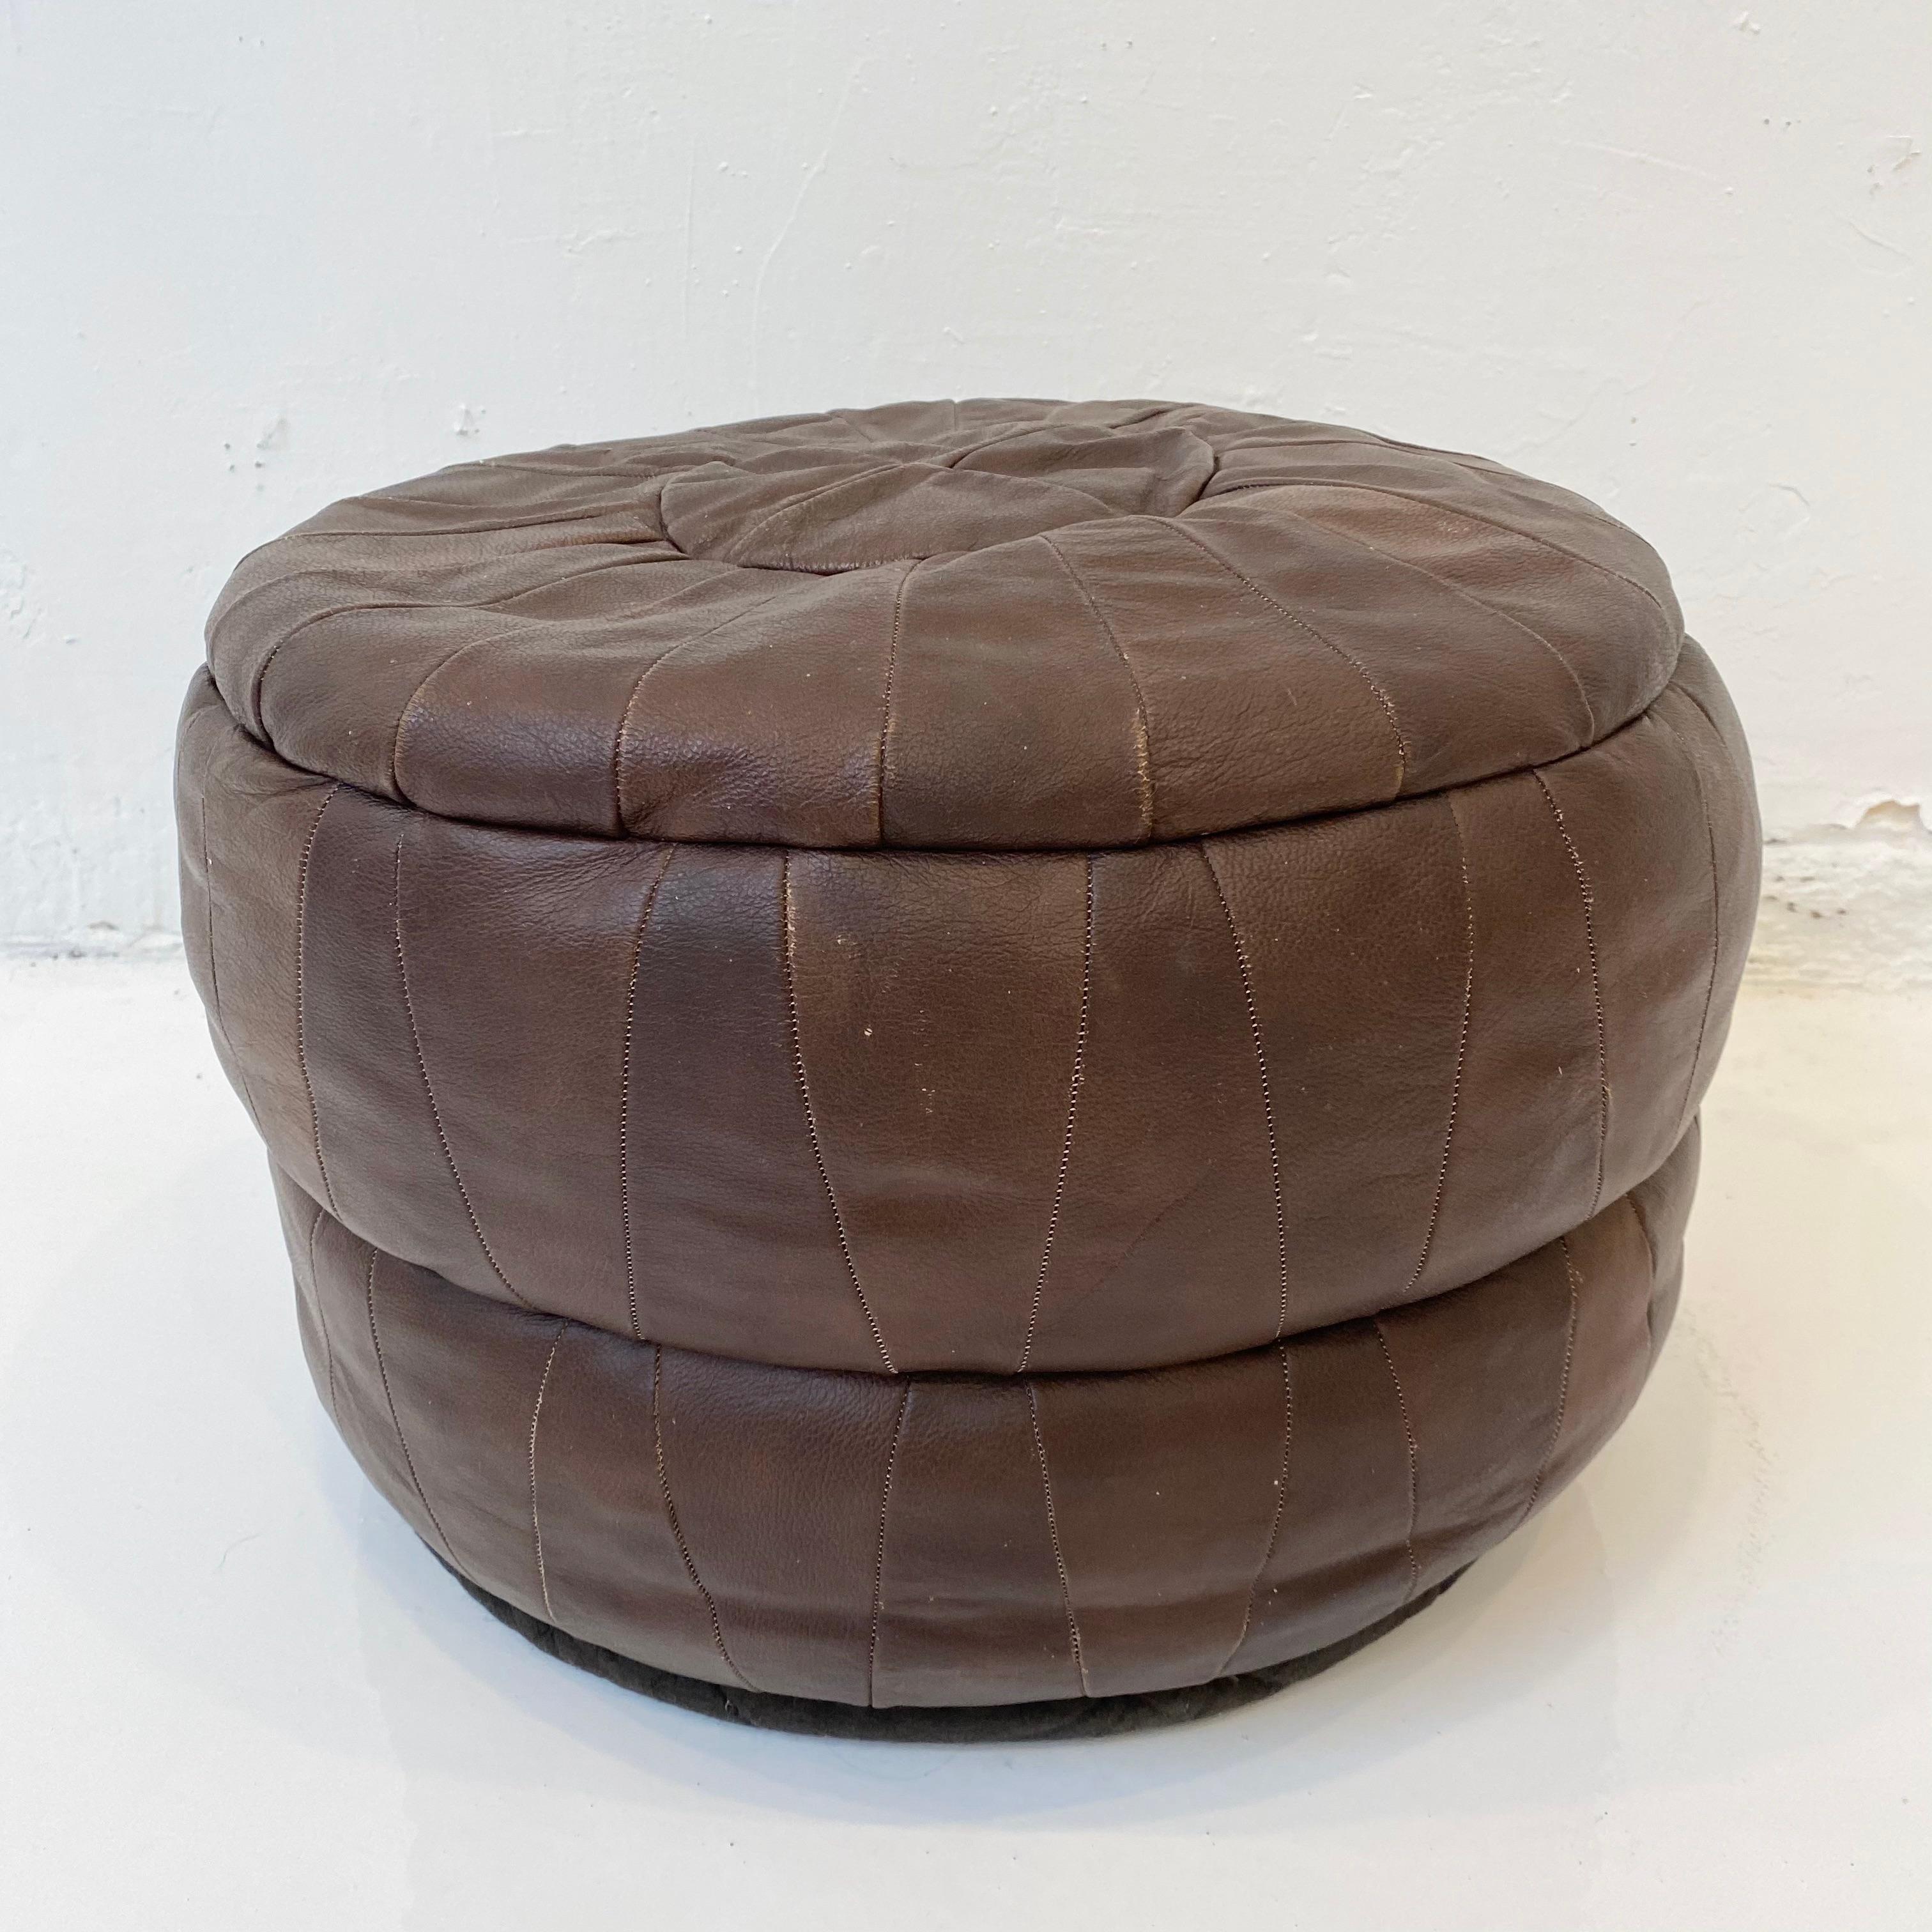 Gorgeous brown leather pouf by De Sede with triangular patchwork. Great coloring and patina to leather. Very good condition. Great accent piece.

 